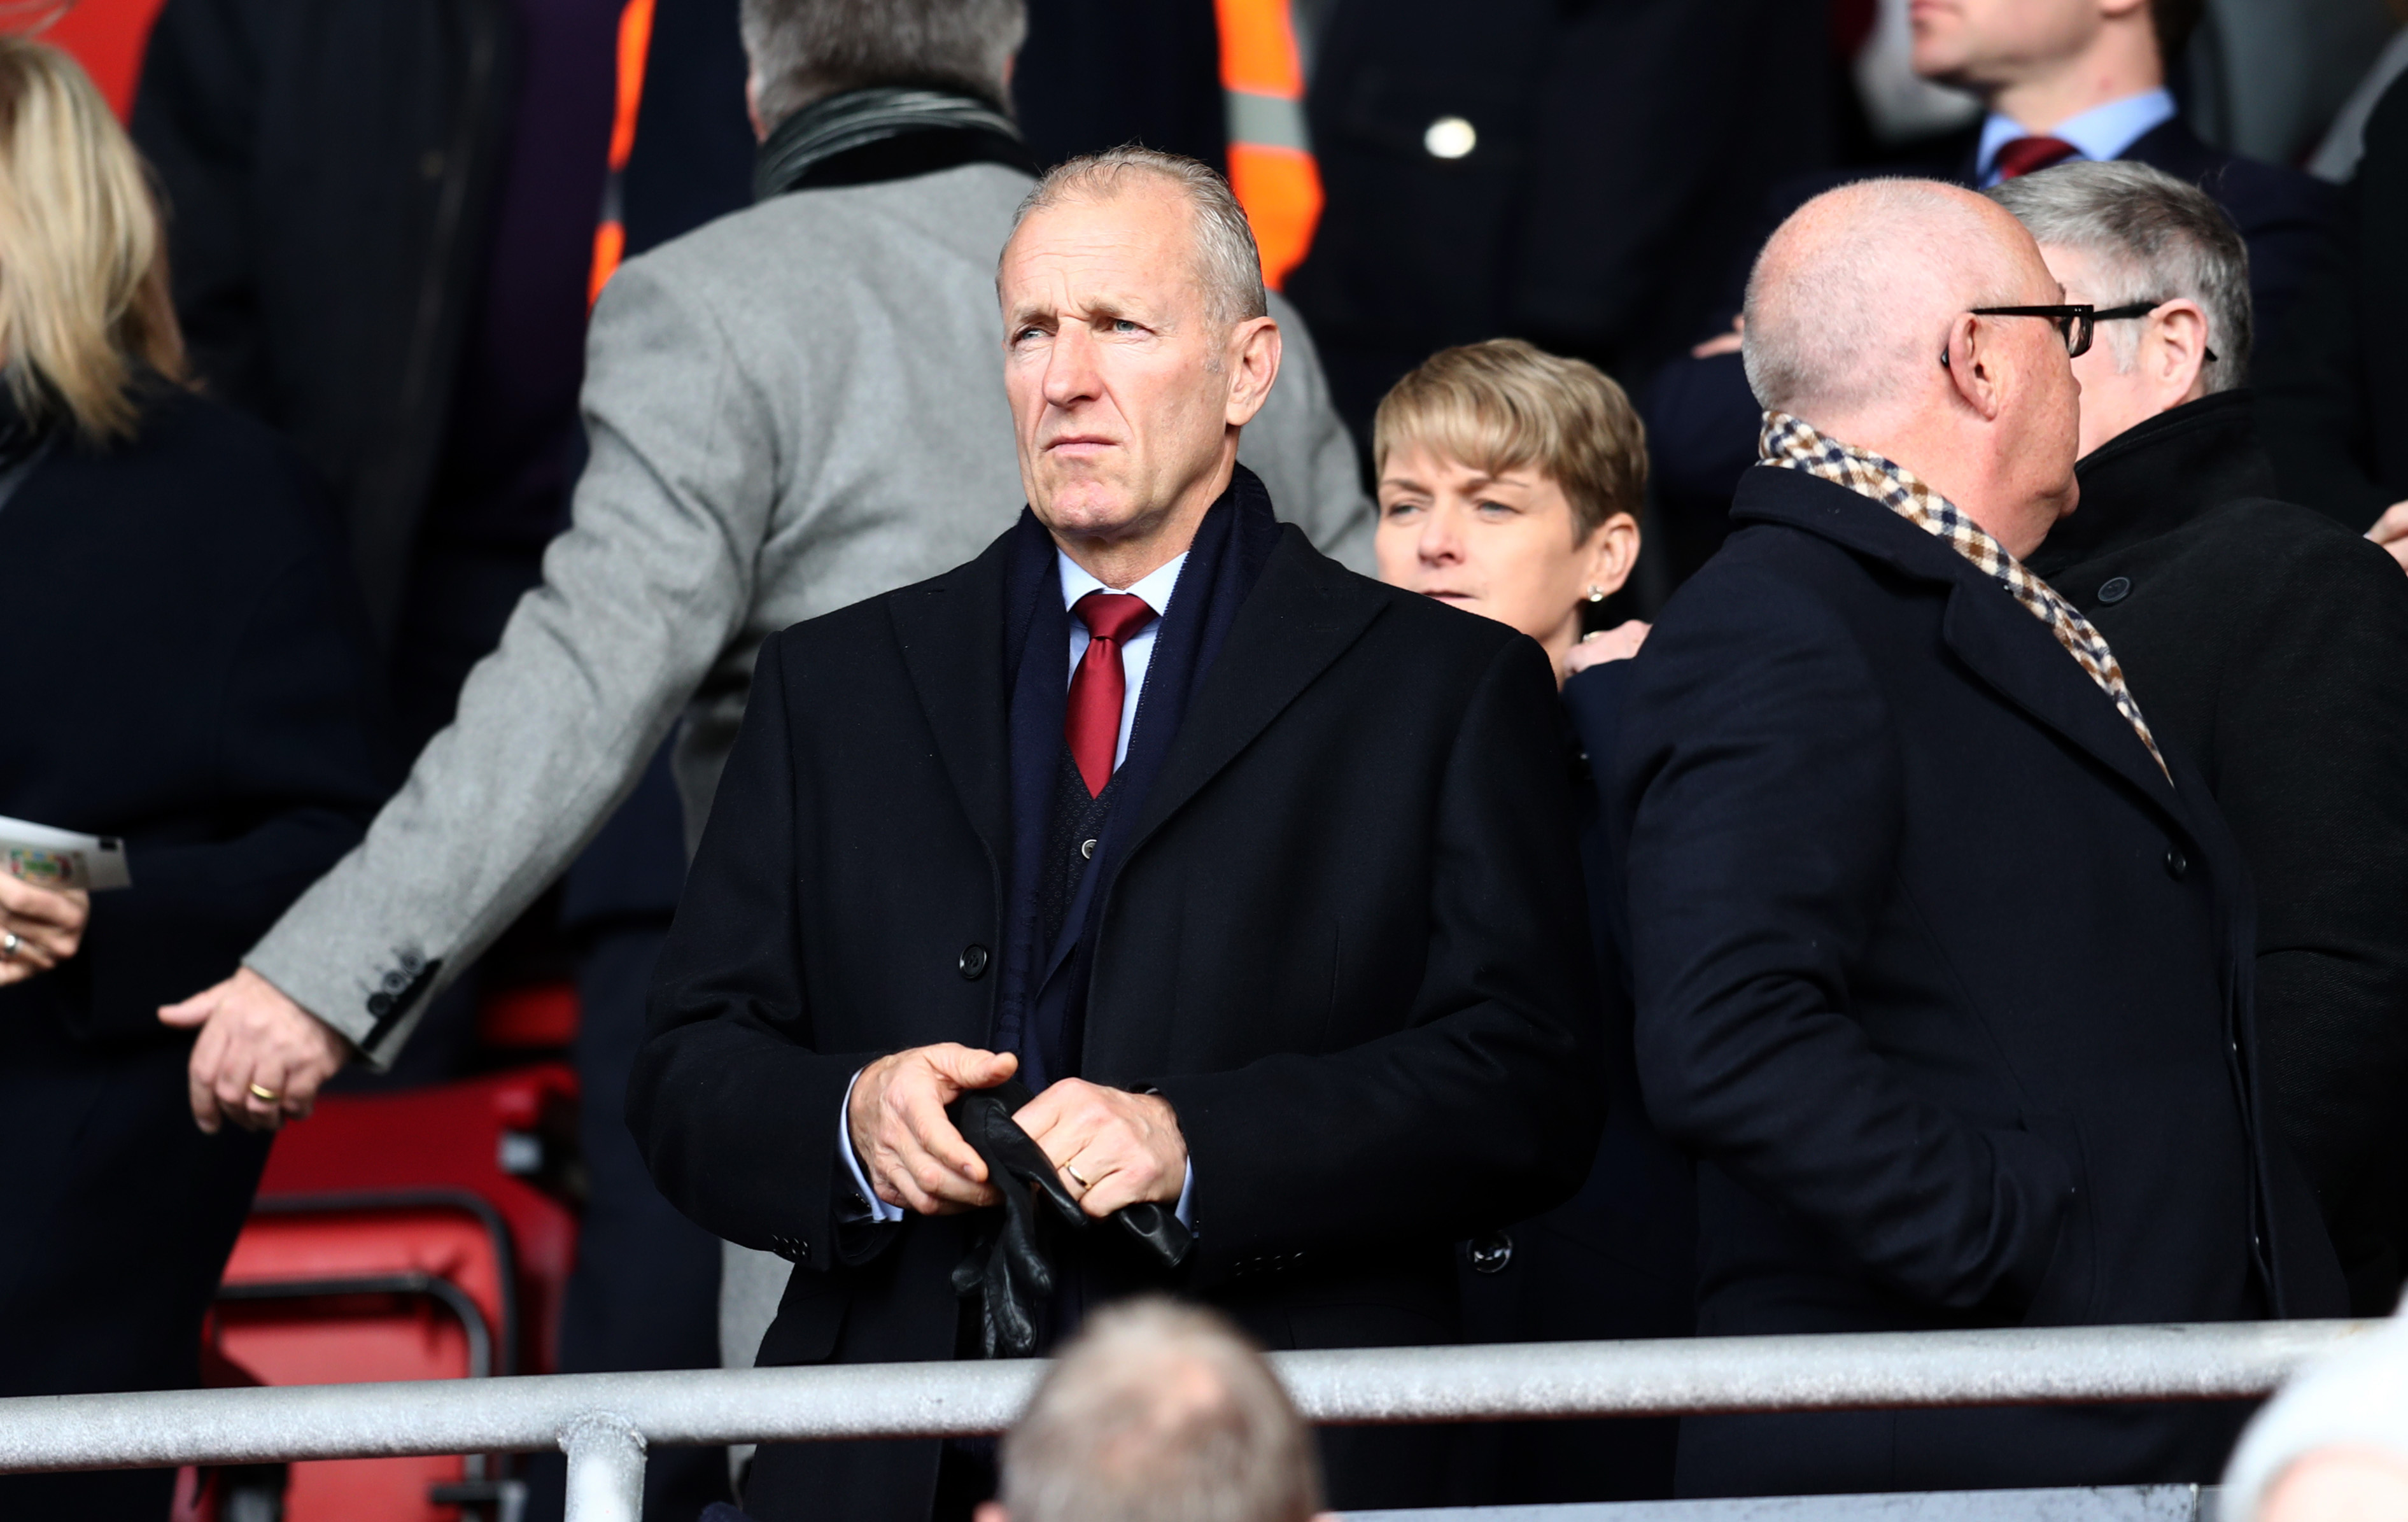 Southampton chairman Ralph Krueger, who is set to leave his post 